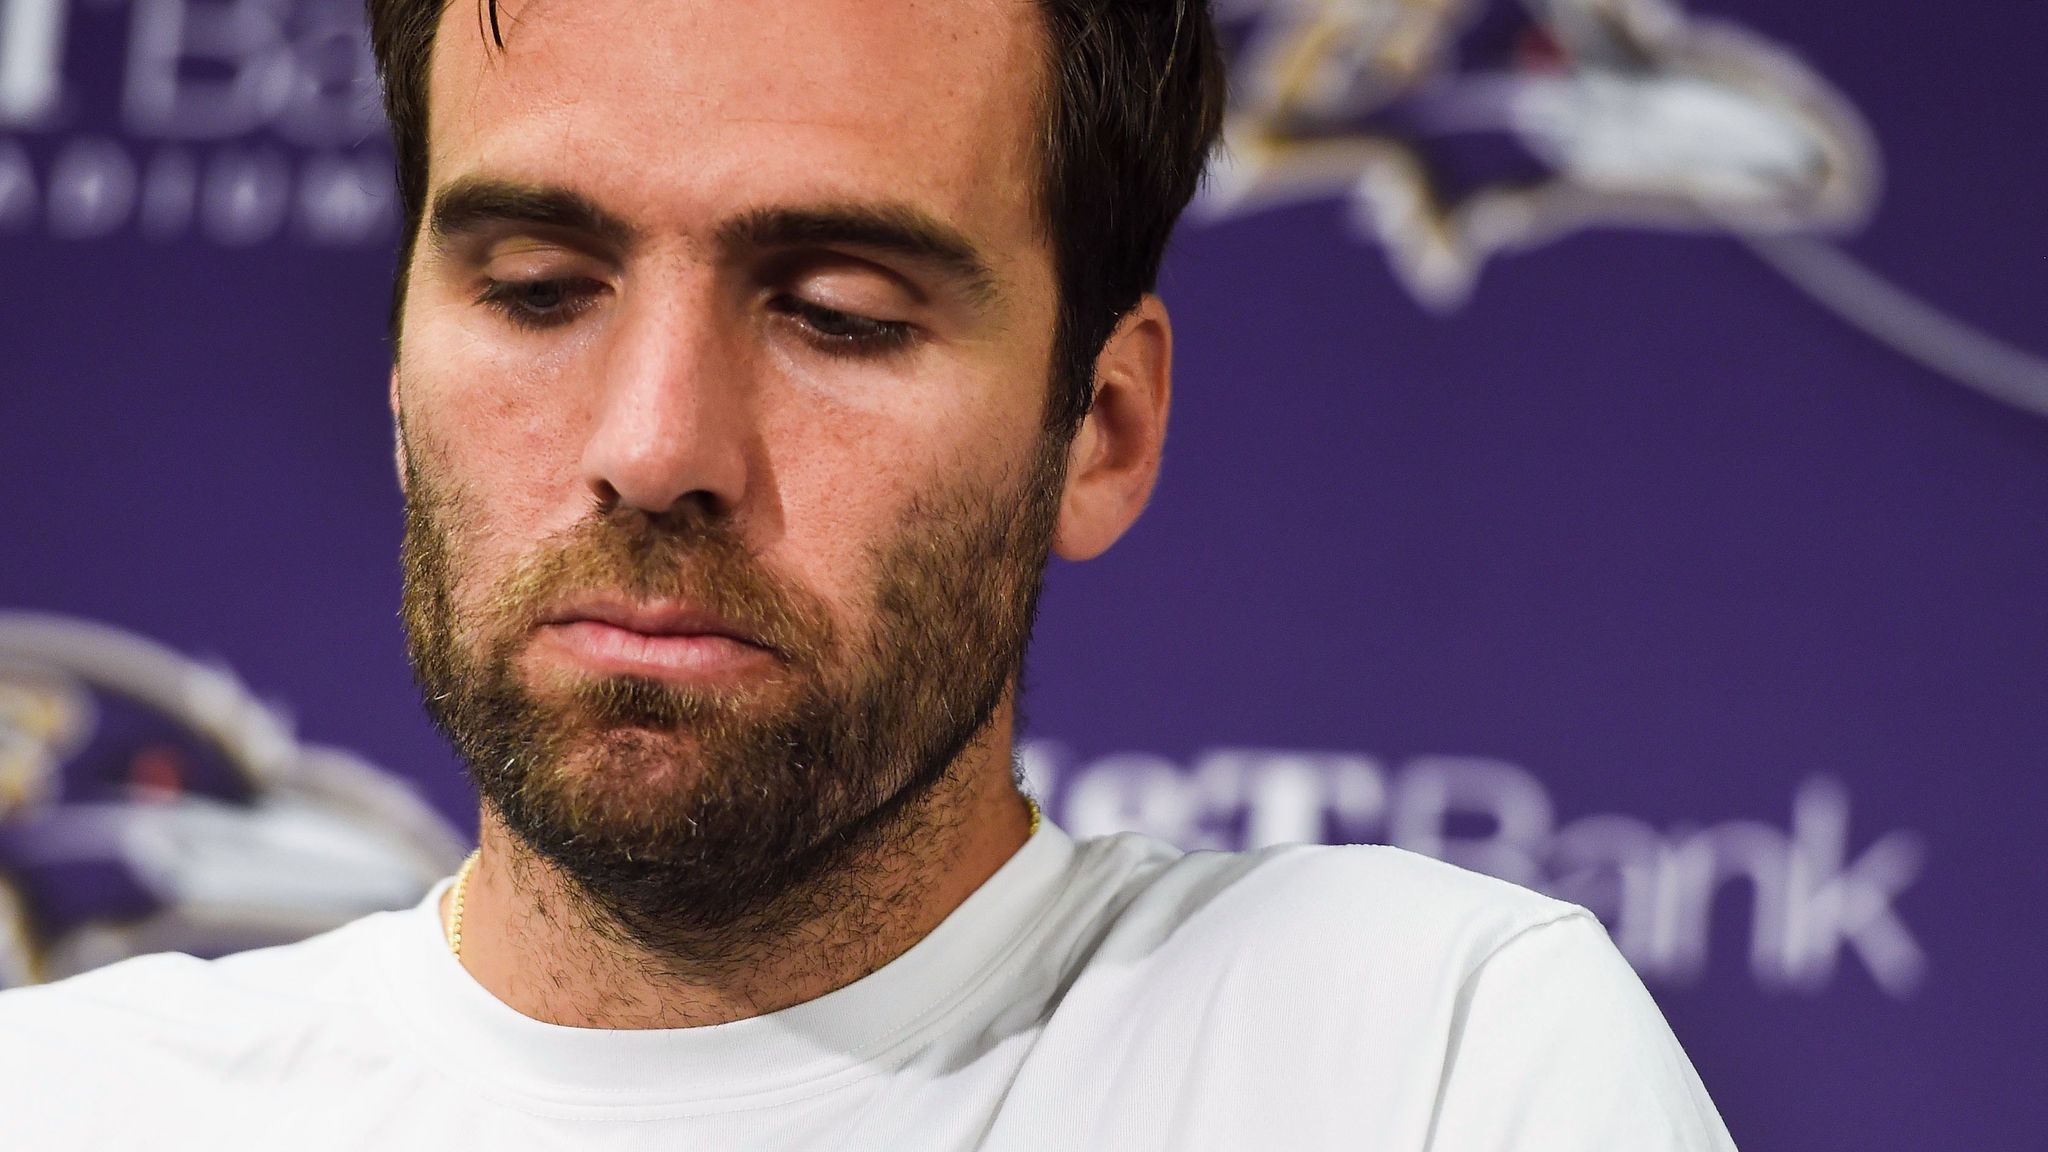 Ravens' Joe Flacco named one of NFL's most overrated quarterbacks in player survey ...2048 x 1152